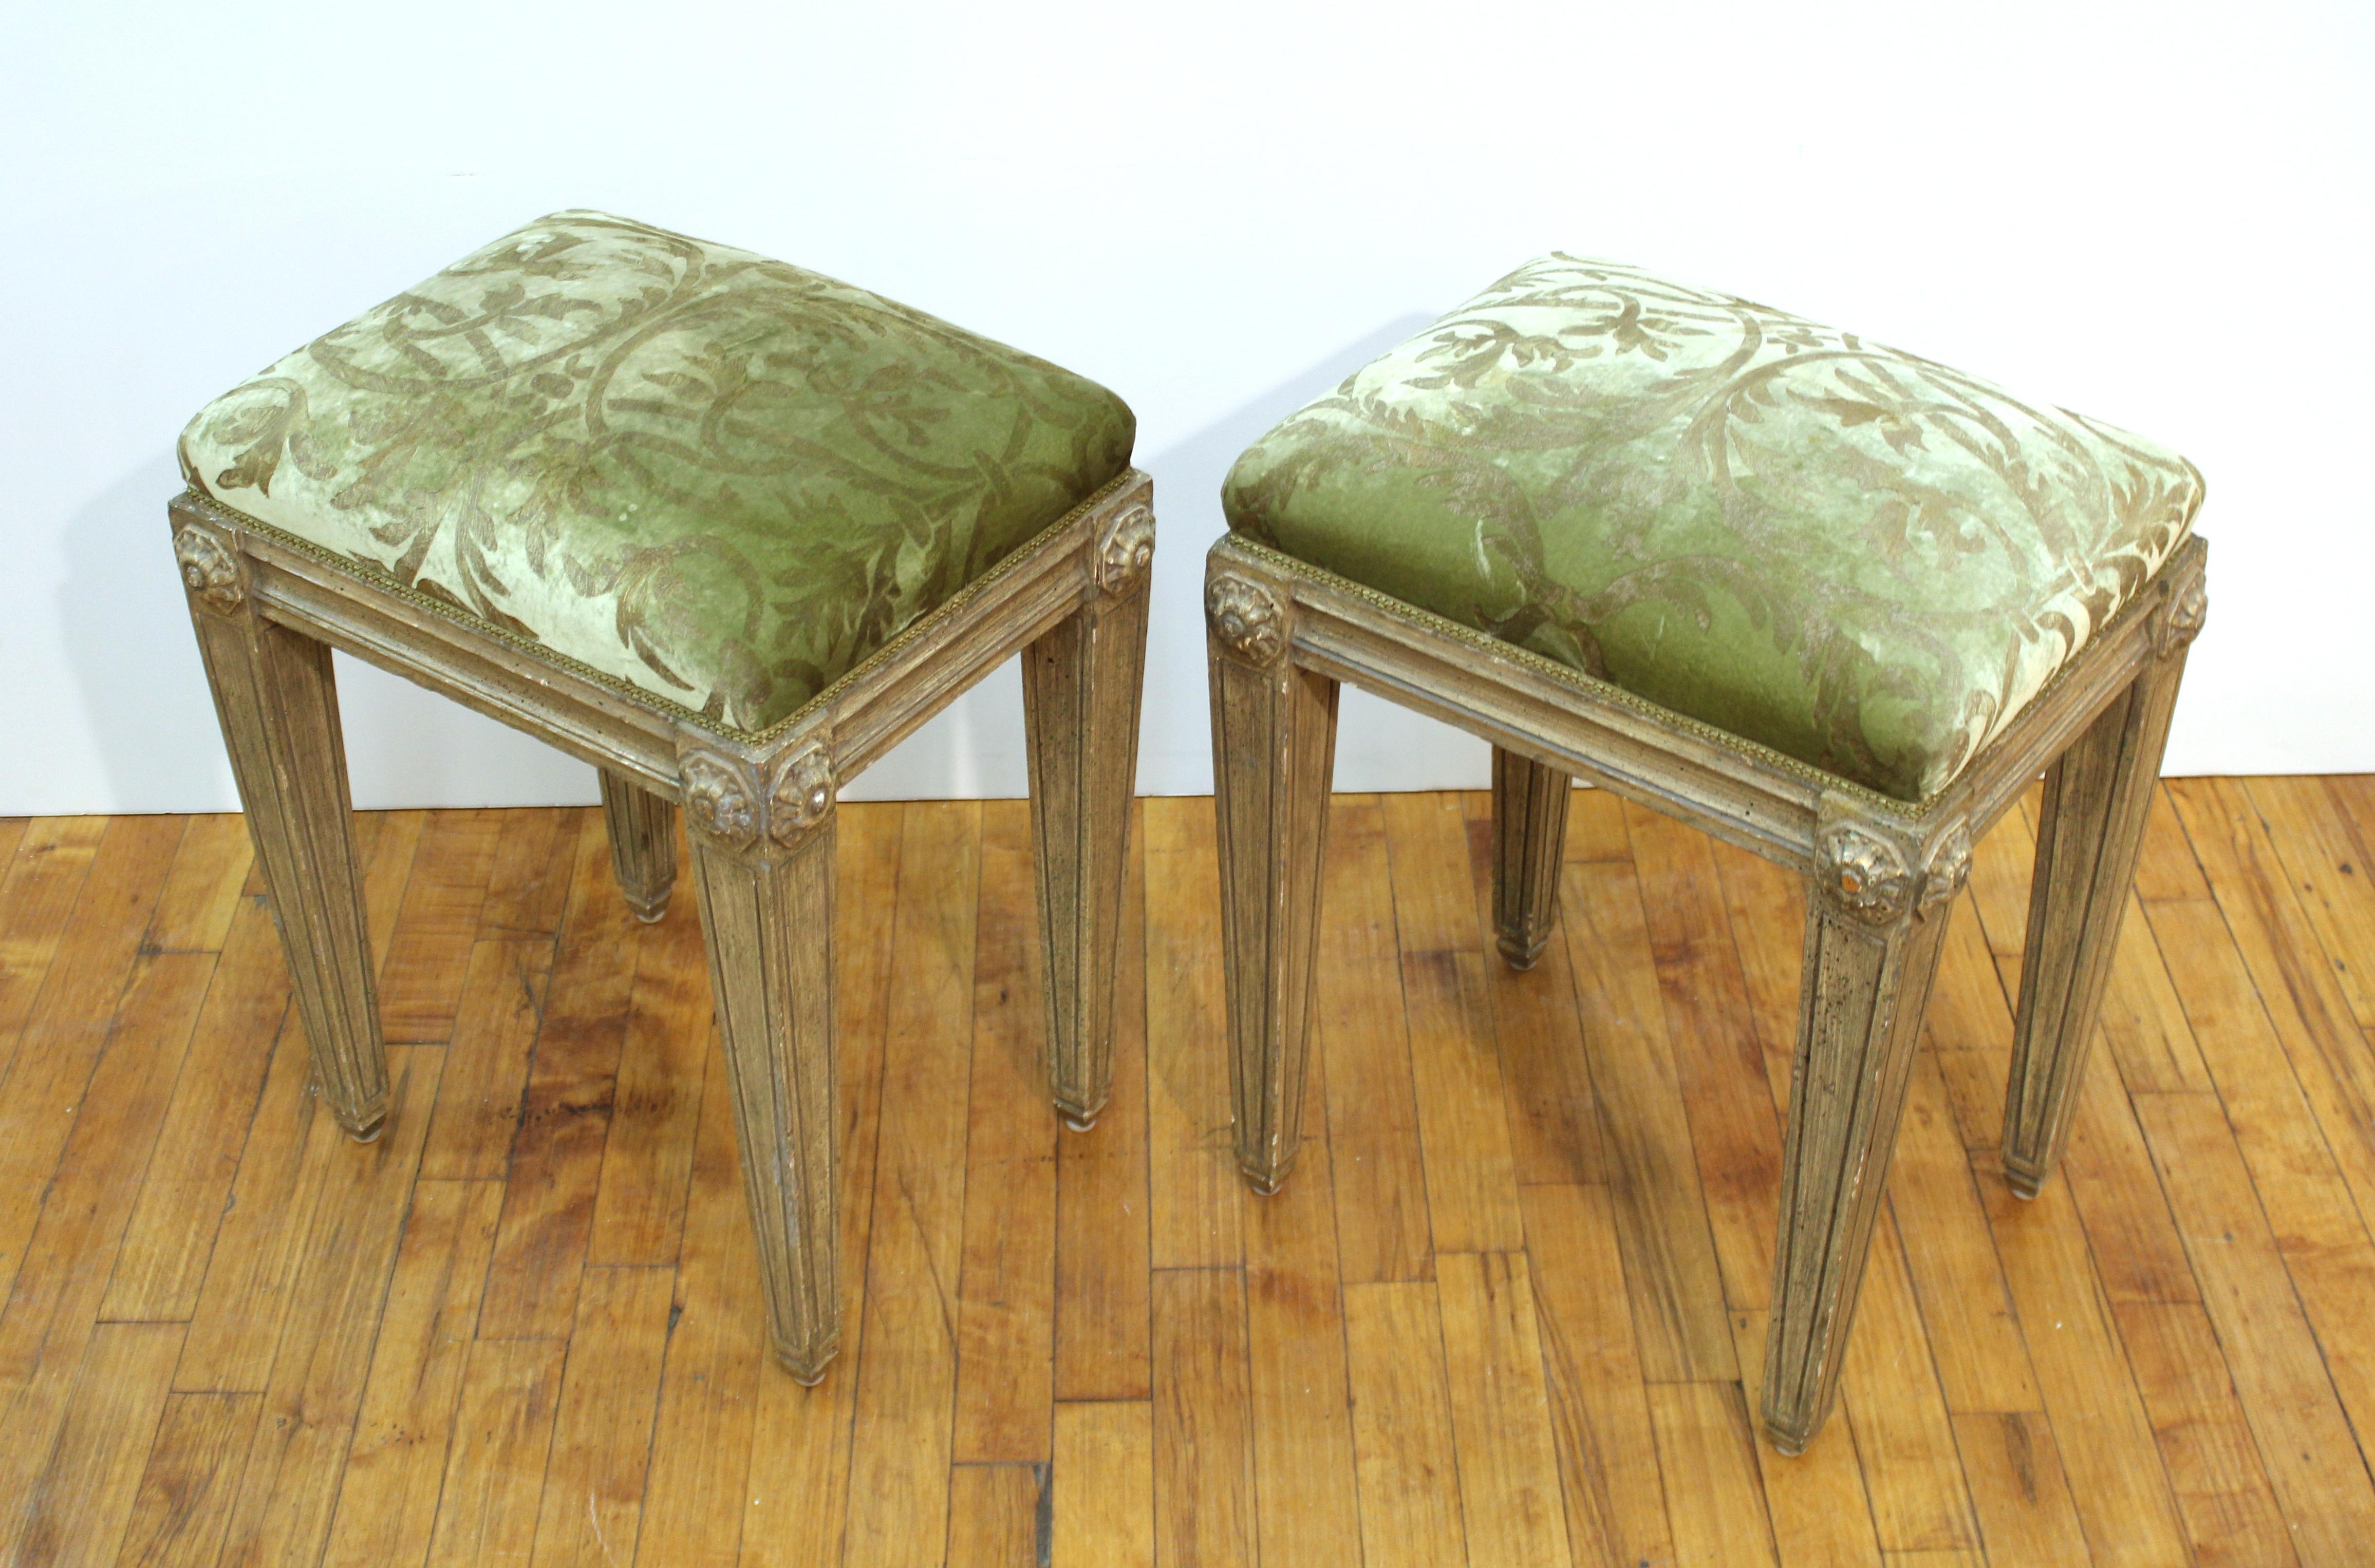 Pair of Neoclassical Revival style carved wood benches with upholstery. In great vintage condition with age-appropriate wear and use.